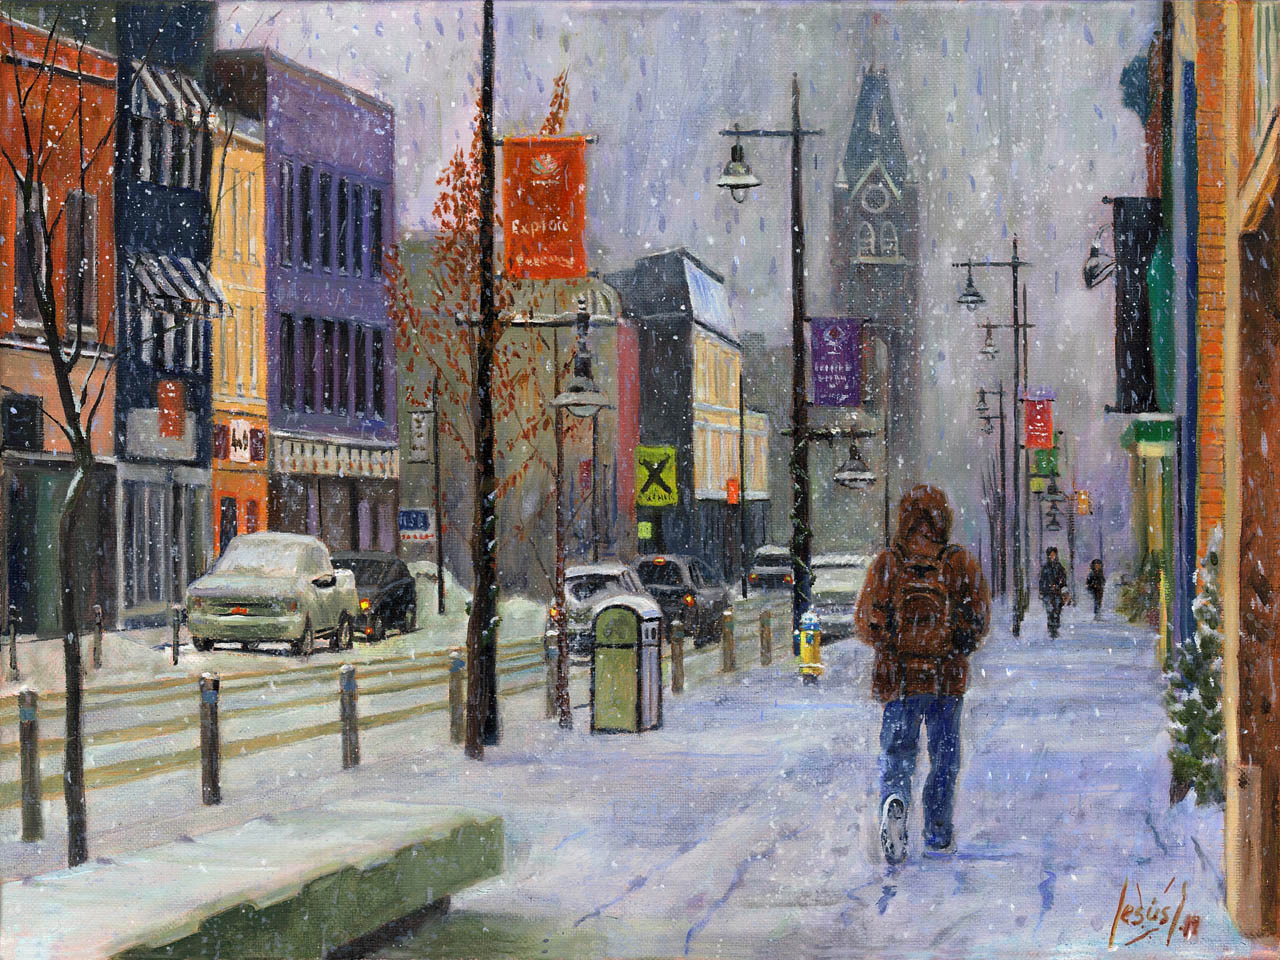 SNOWING IN DOWNTOWN, original oil painting